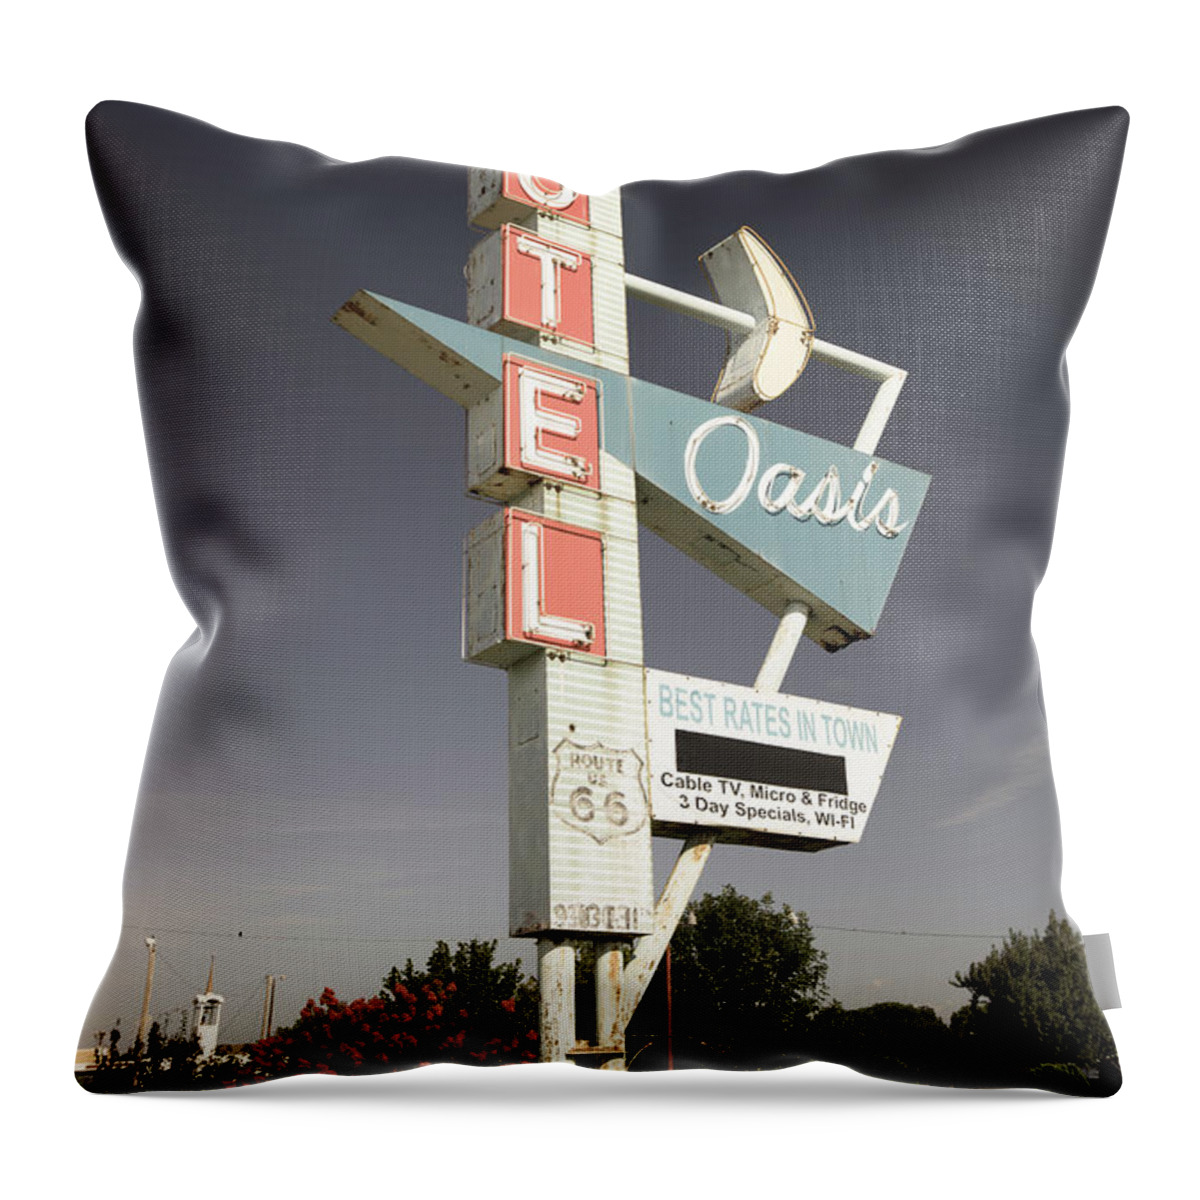 America Throw Pillow featuring the photograph Aged Oasis Motel Route 66 Sign - Tulsa Oklahoma by Gregory Ballos